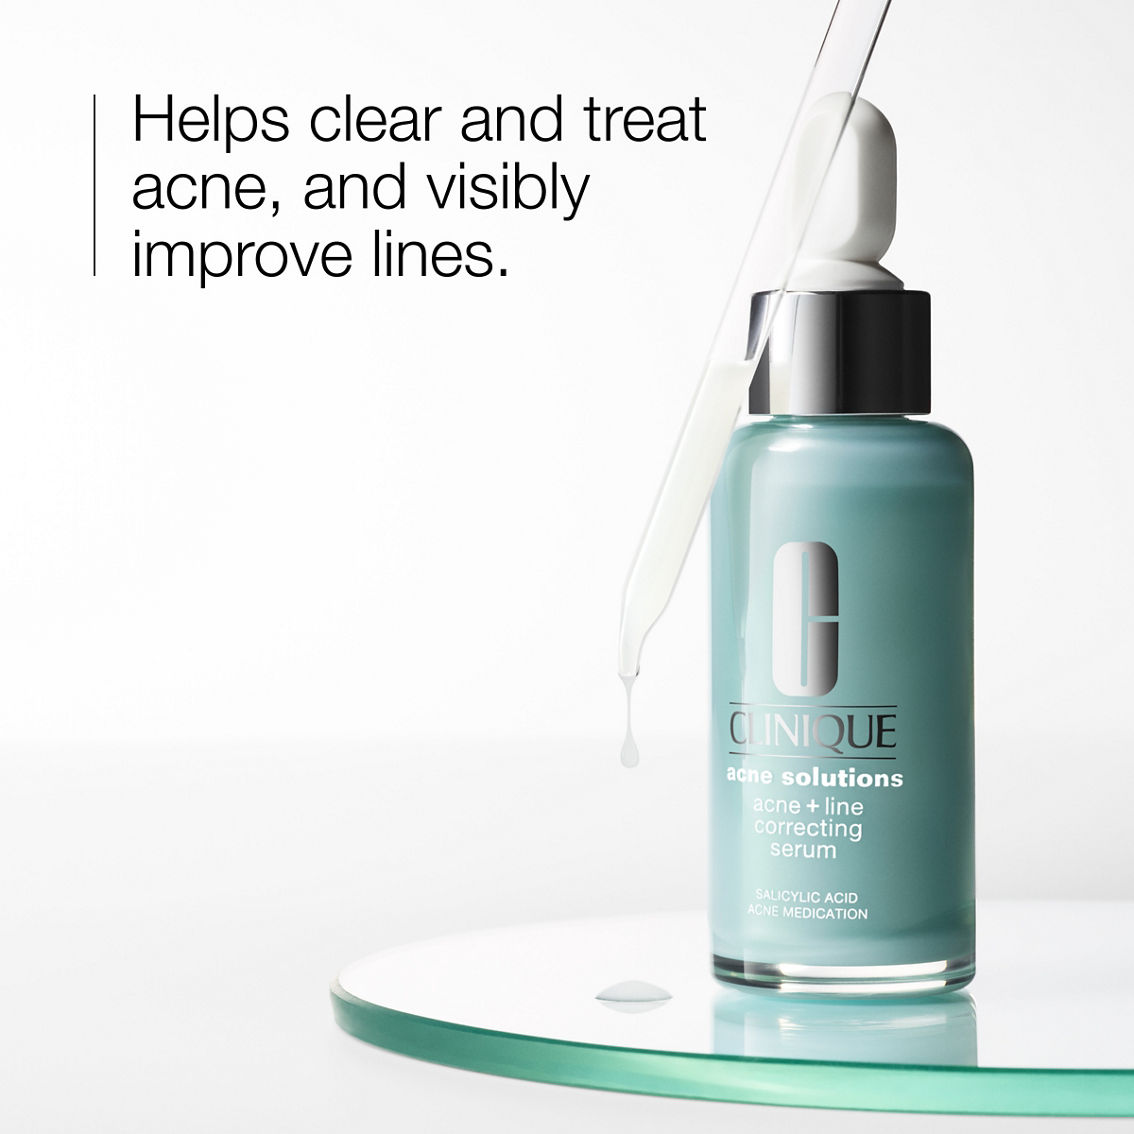 Clinique Acne Solutions™ Acne + Line Correcting Serum - Image 3 of 7